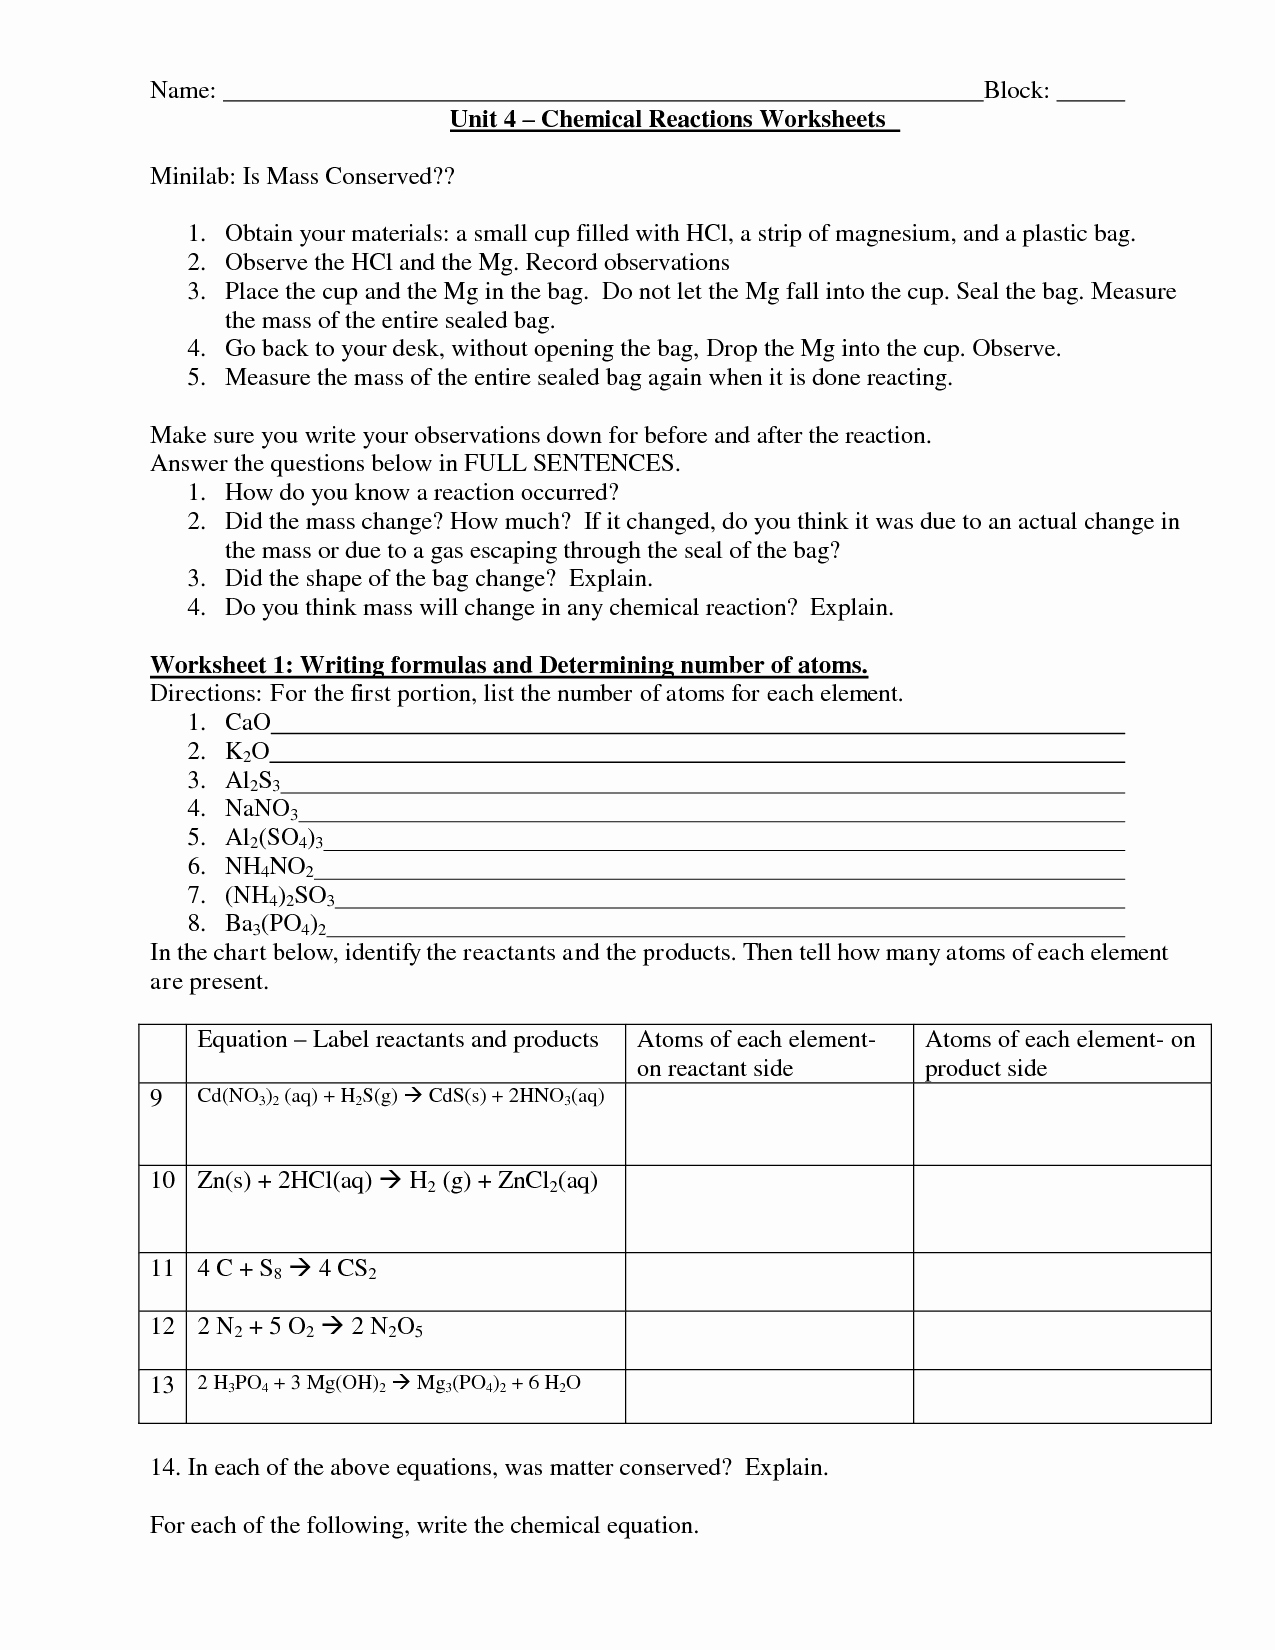 Enzyme Reactions Worksheet Answers Awesome 20 Best Of Enzymes and Chemical Reactions Worksheet